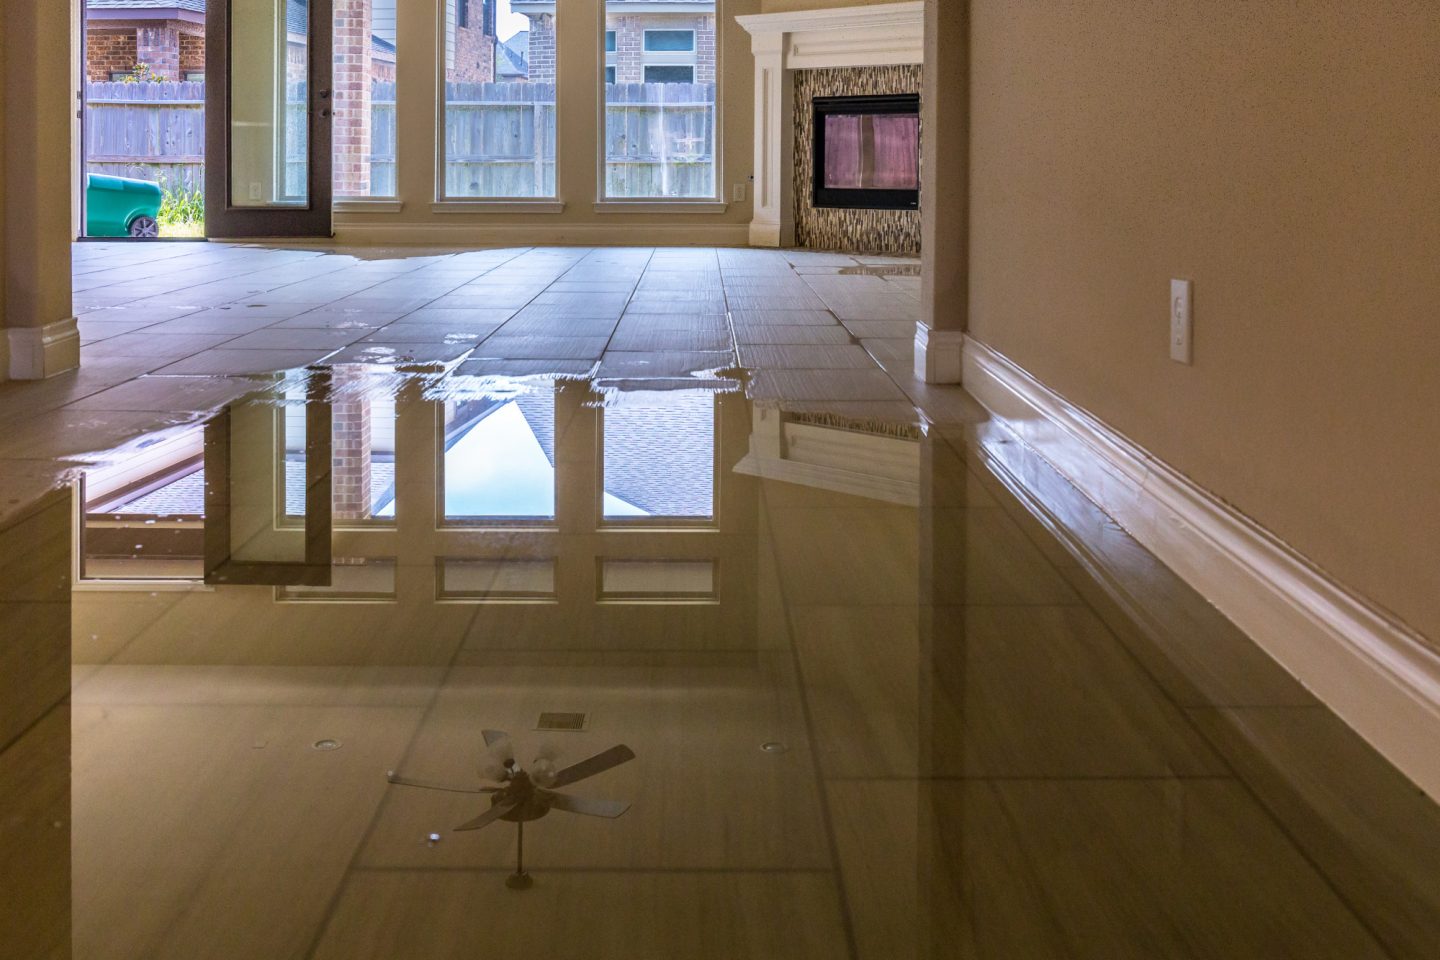 What to Do After a Bathroom Flood – 5 Actionable Steps